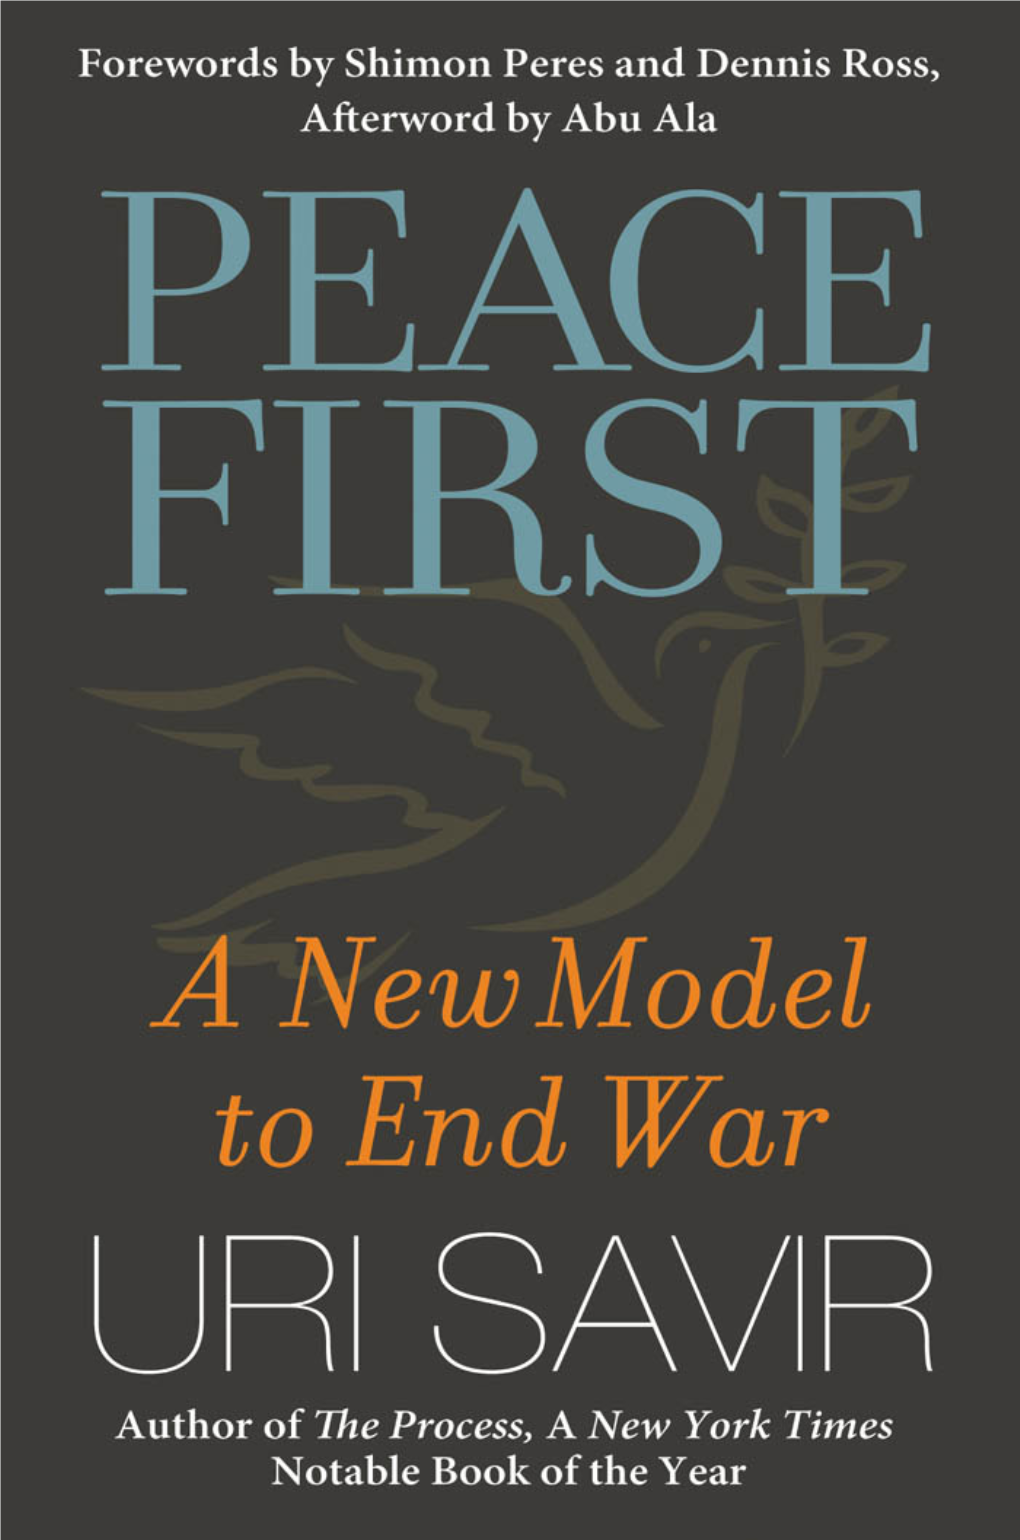 An Excerpt from Peace First: a New Model to End